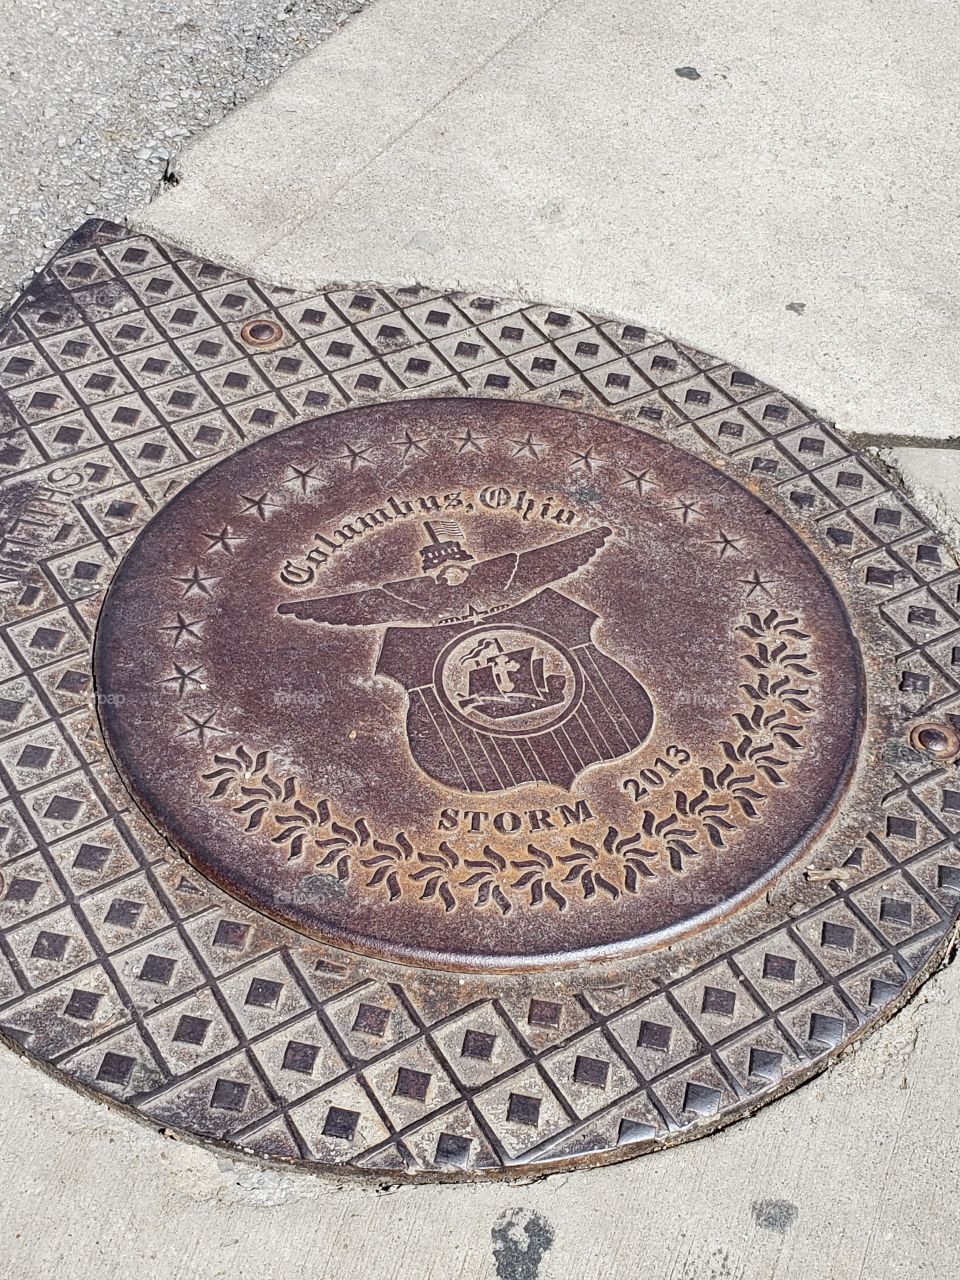 Storm drain cover